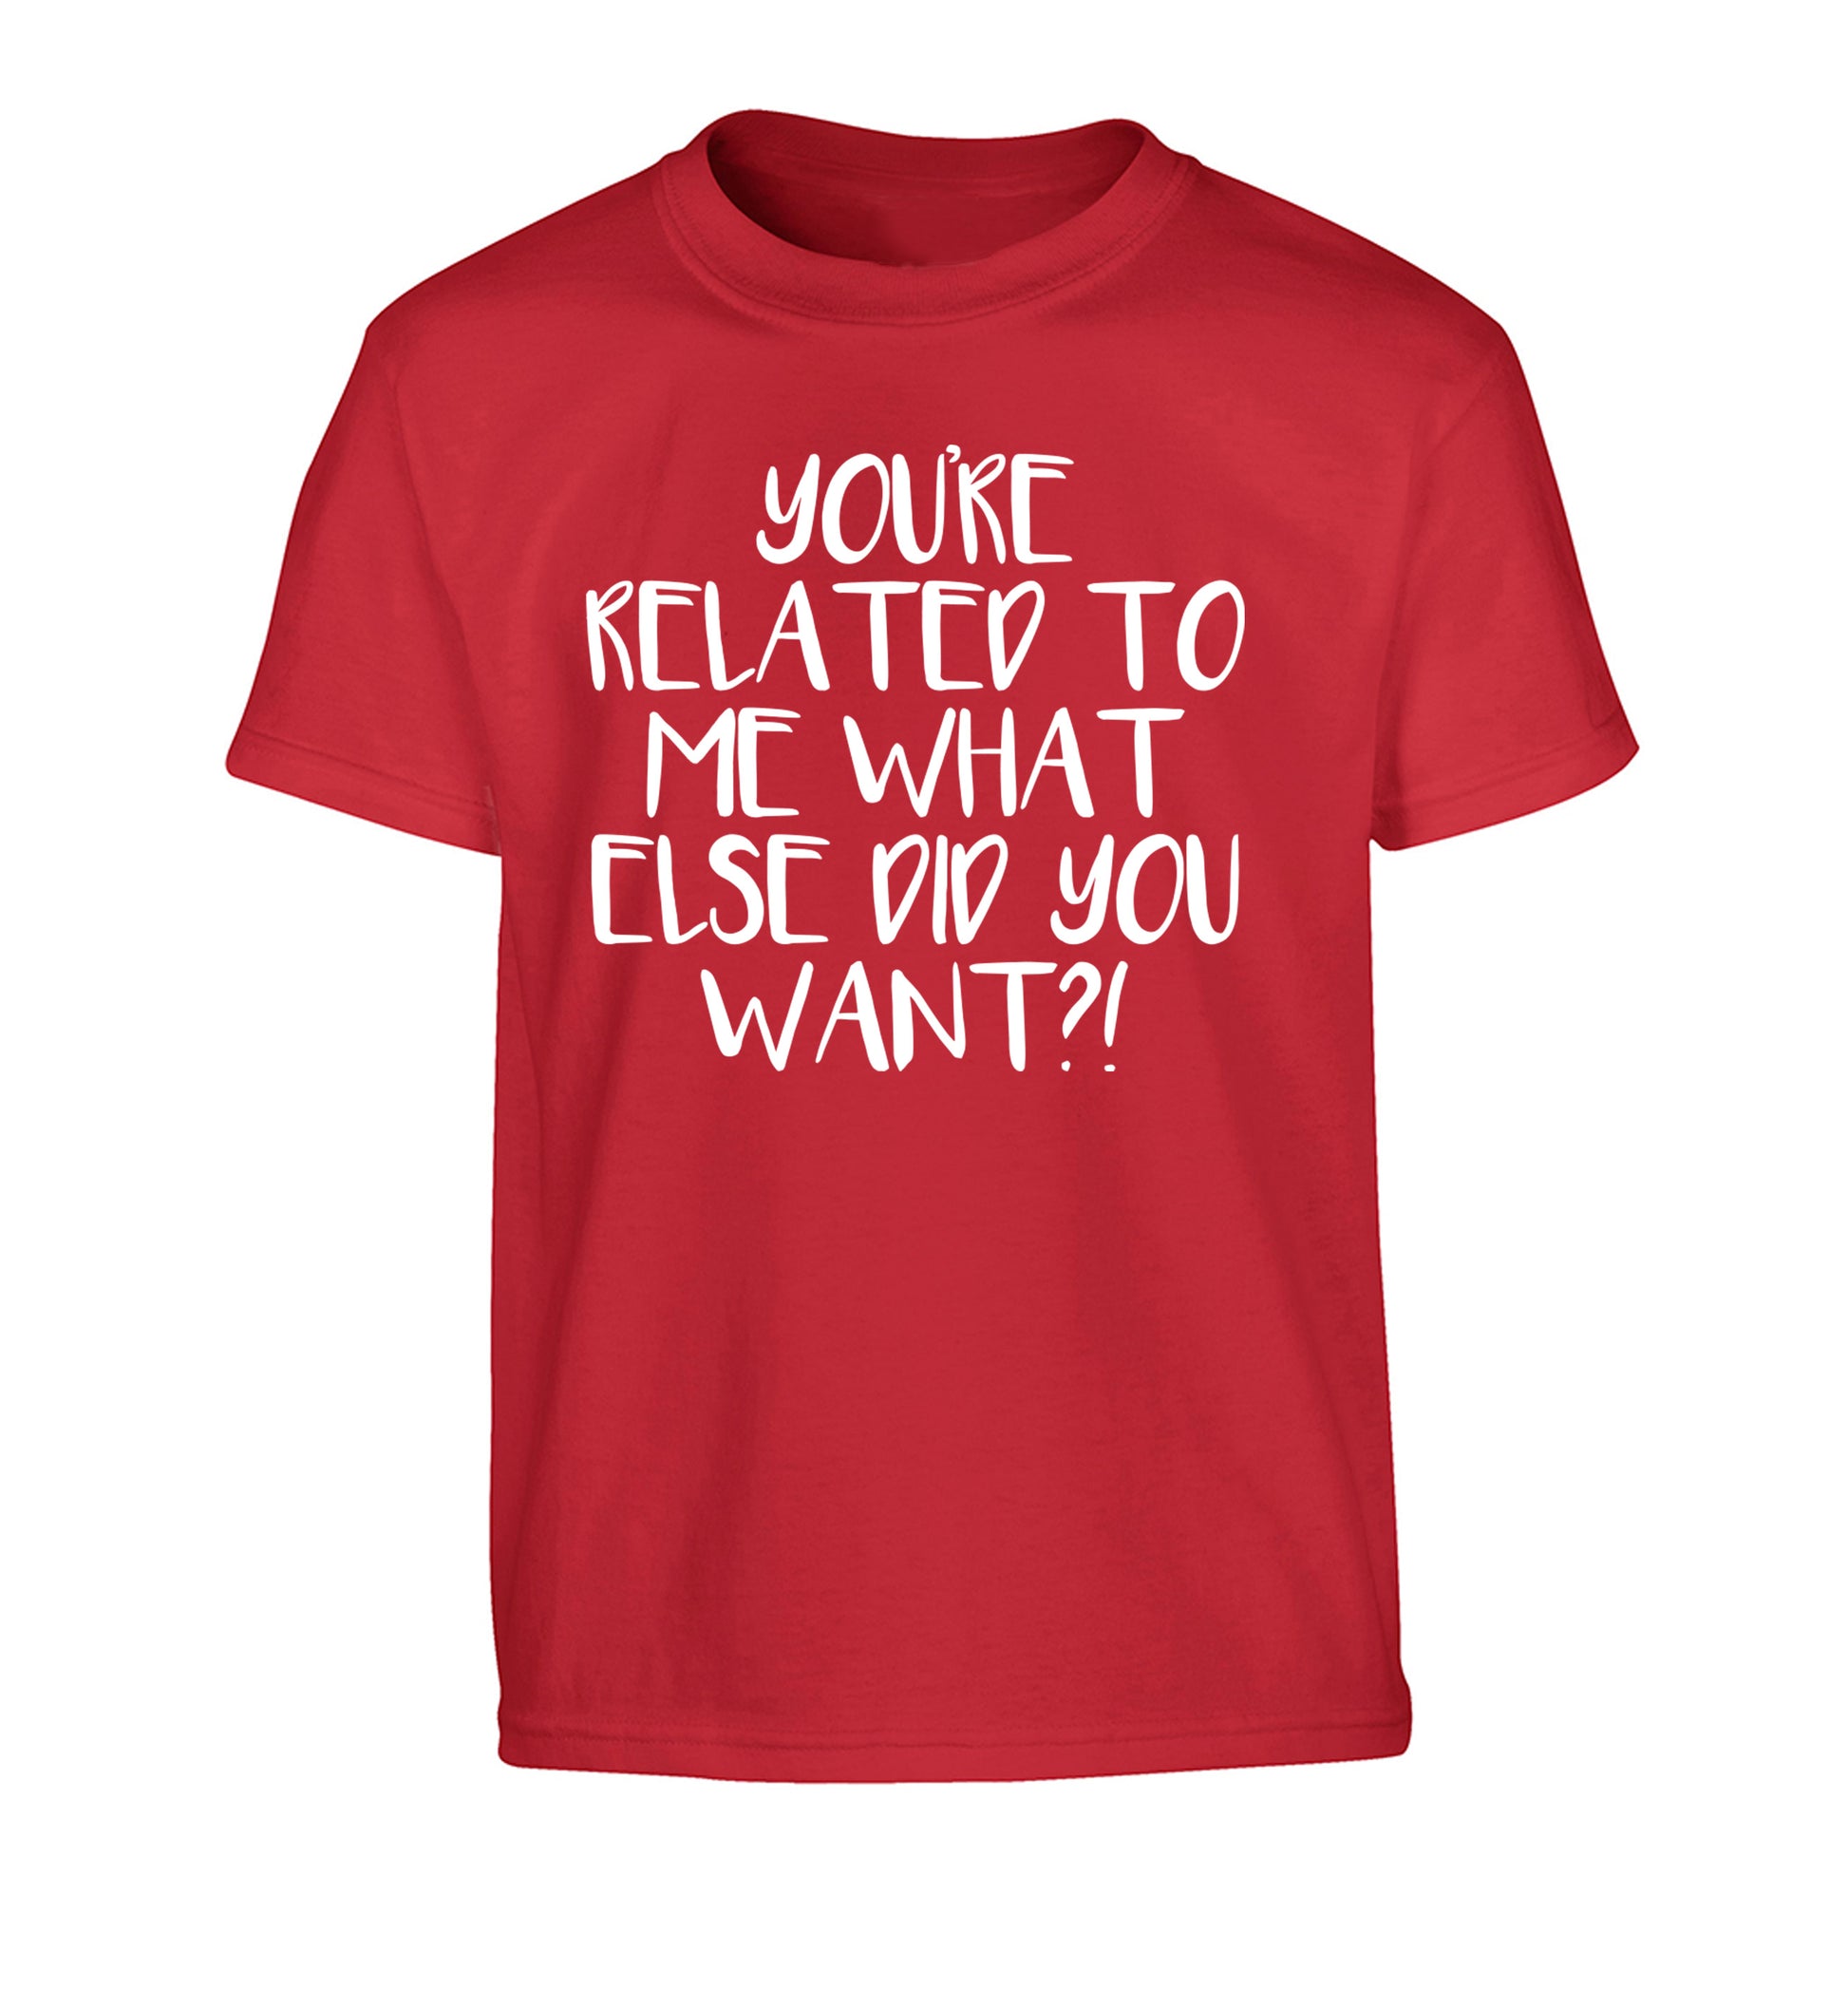 You're related to me what more do you want? Children's red Tshirt 12-13 Years